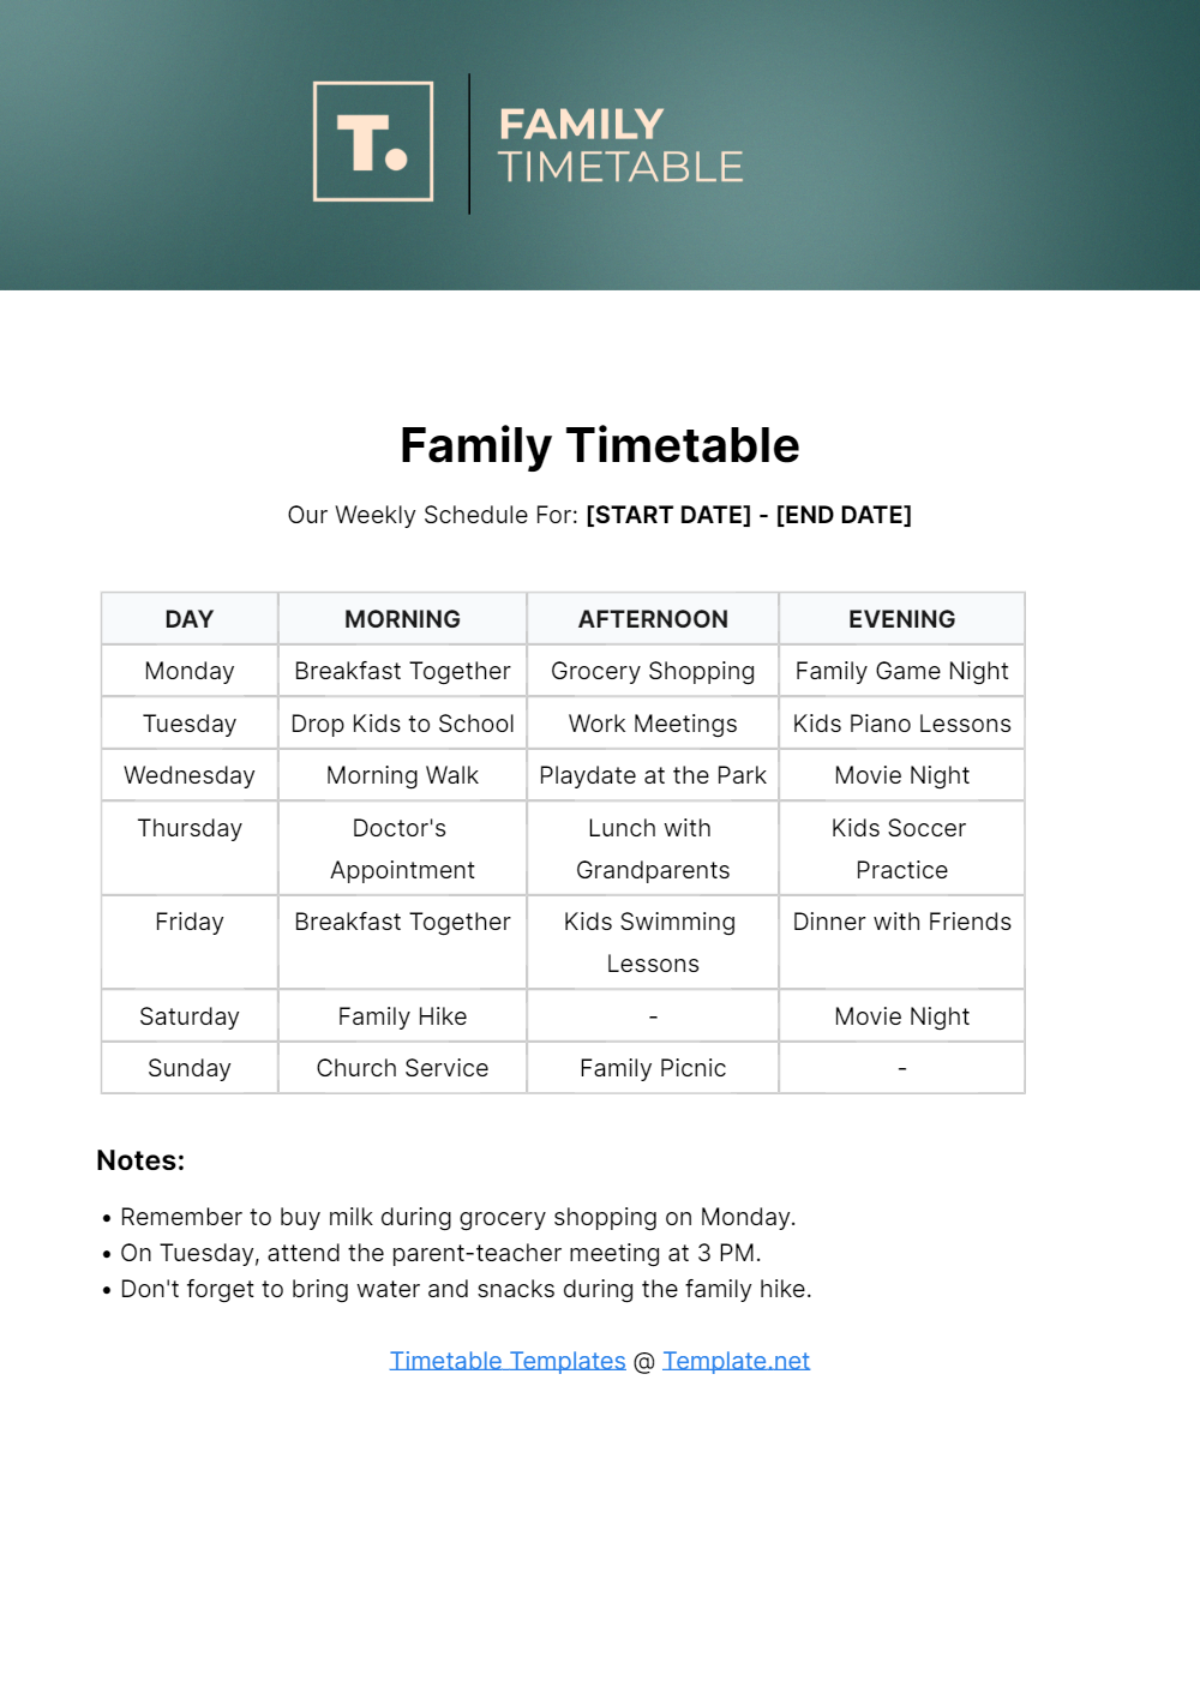 Family Timetable Template